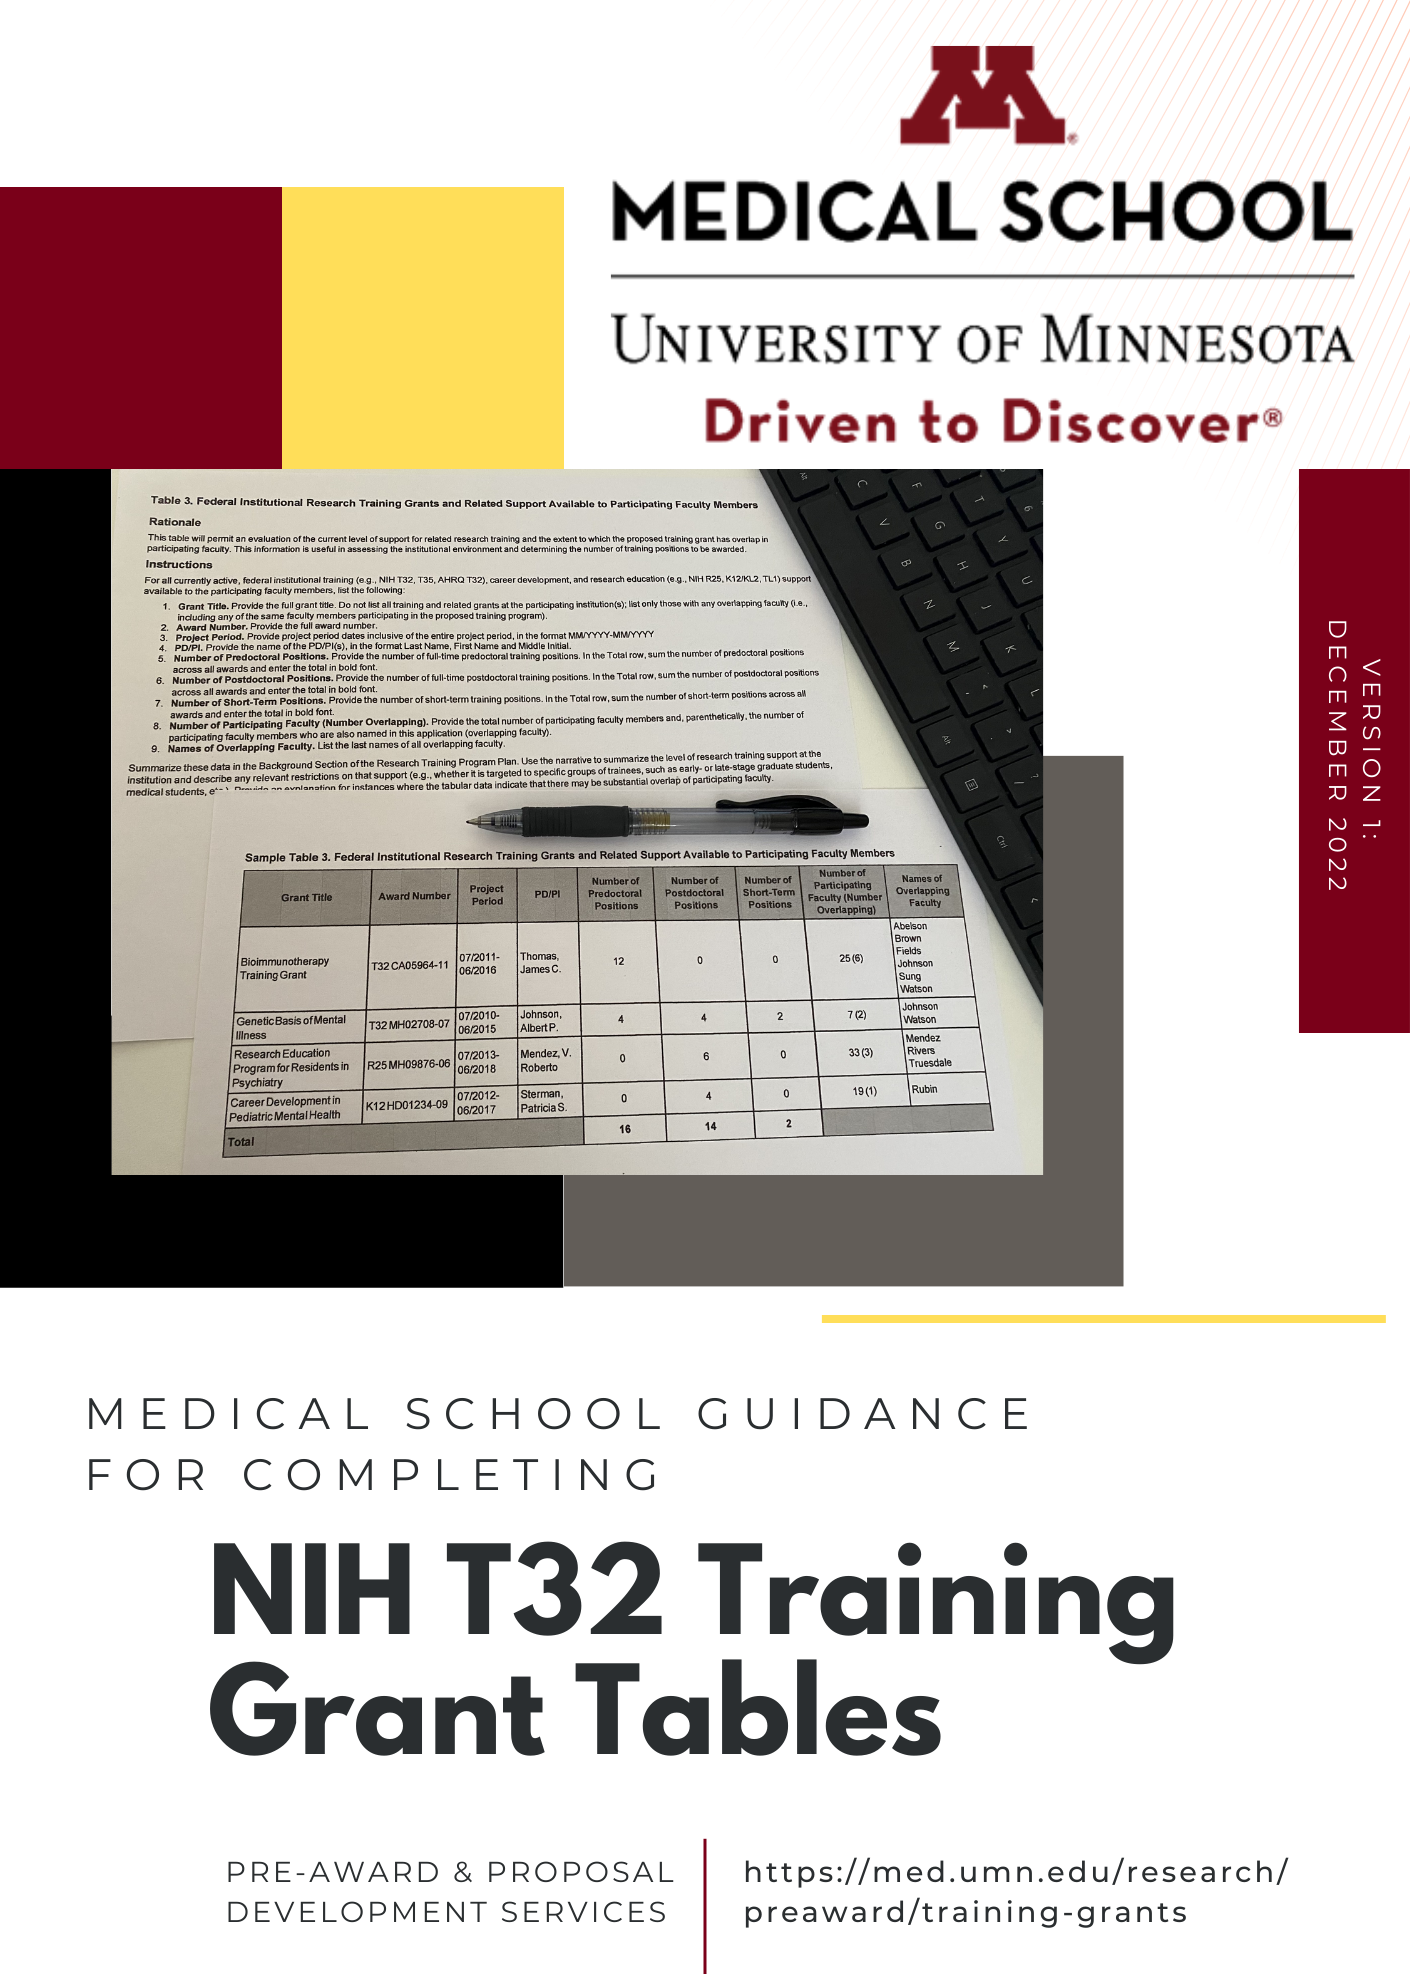 Medical School Guidance for Completing NIH T32 Training Grant Tables